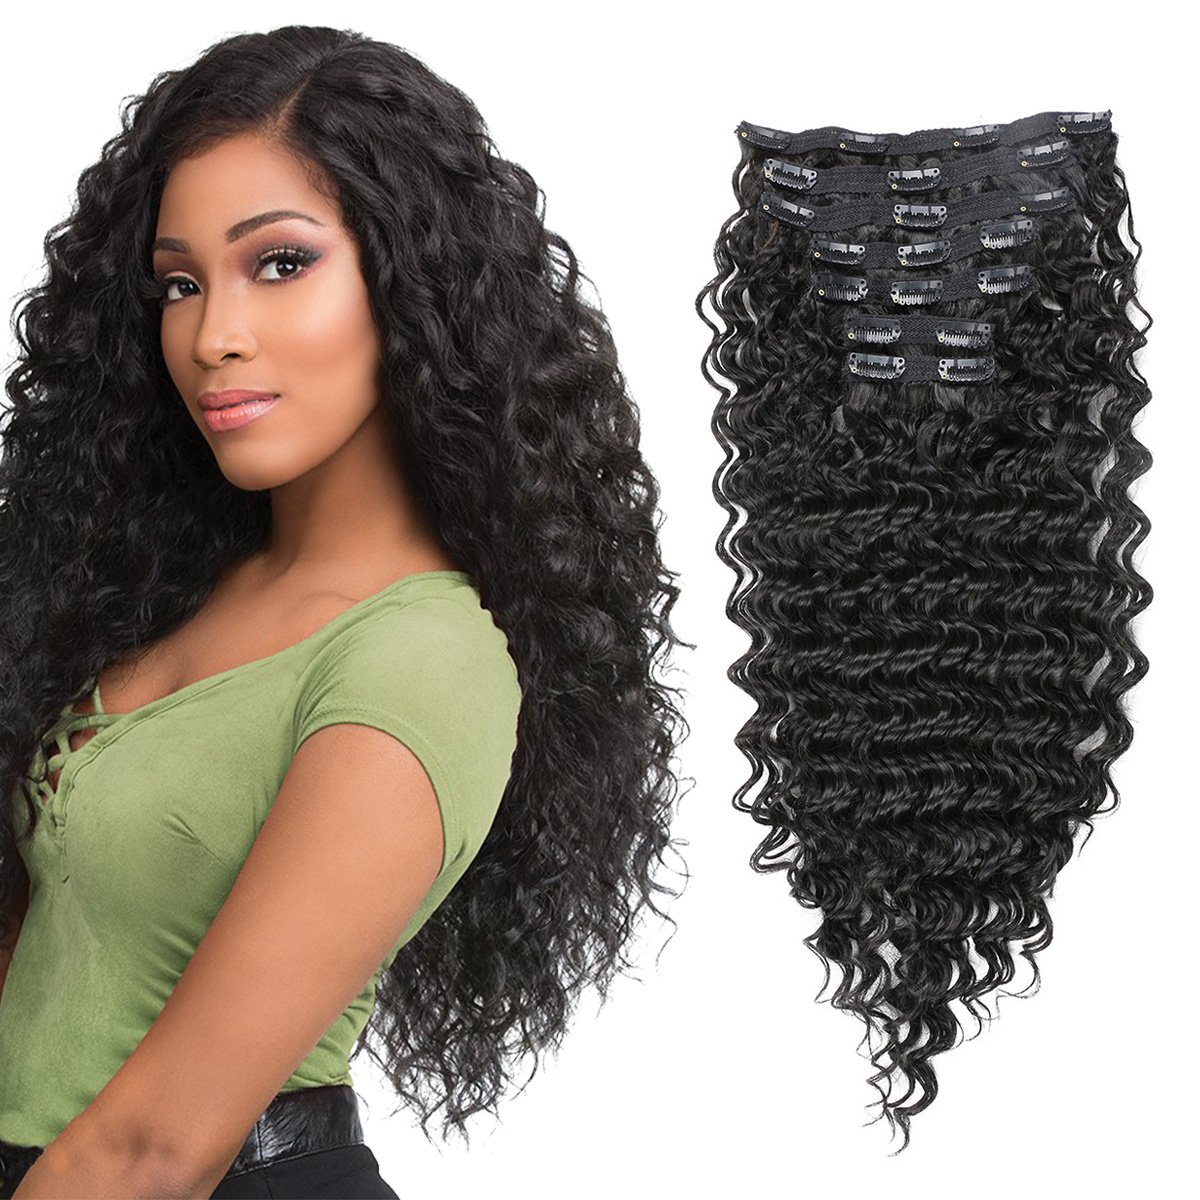 Achieving Effortless Beauty With Lace Front Wigs